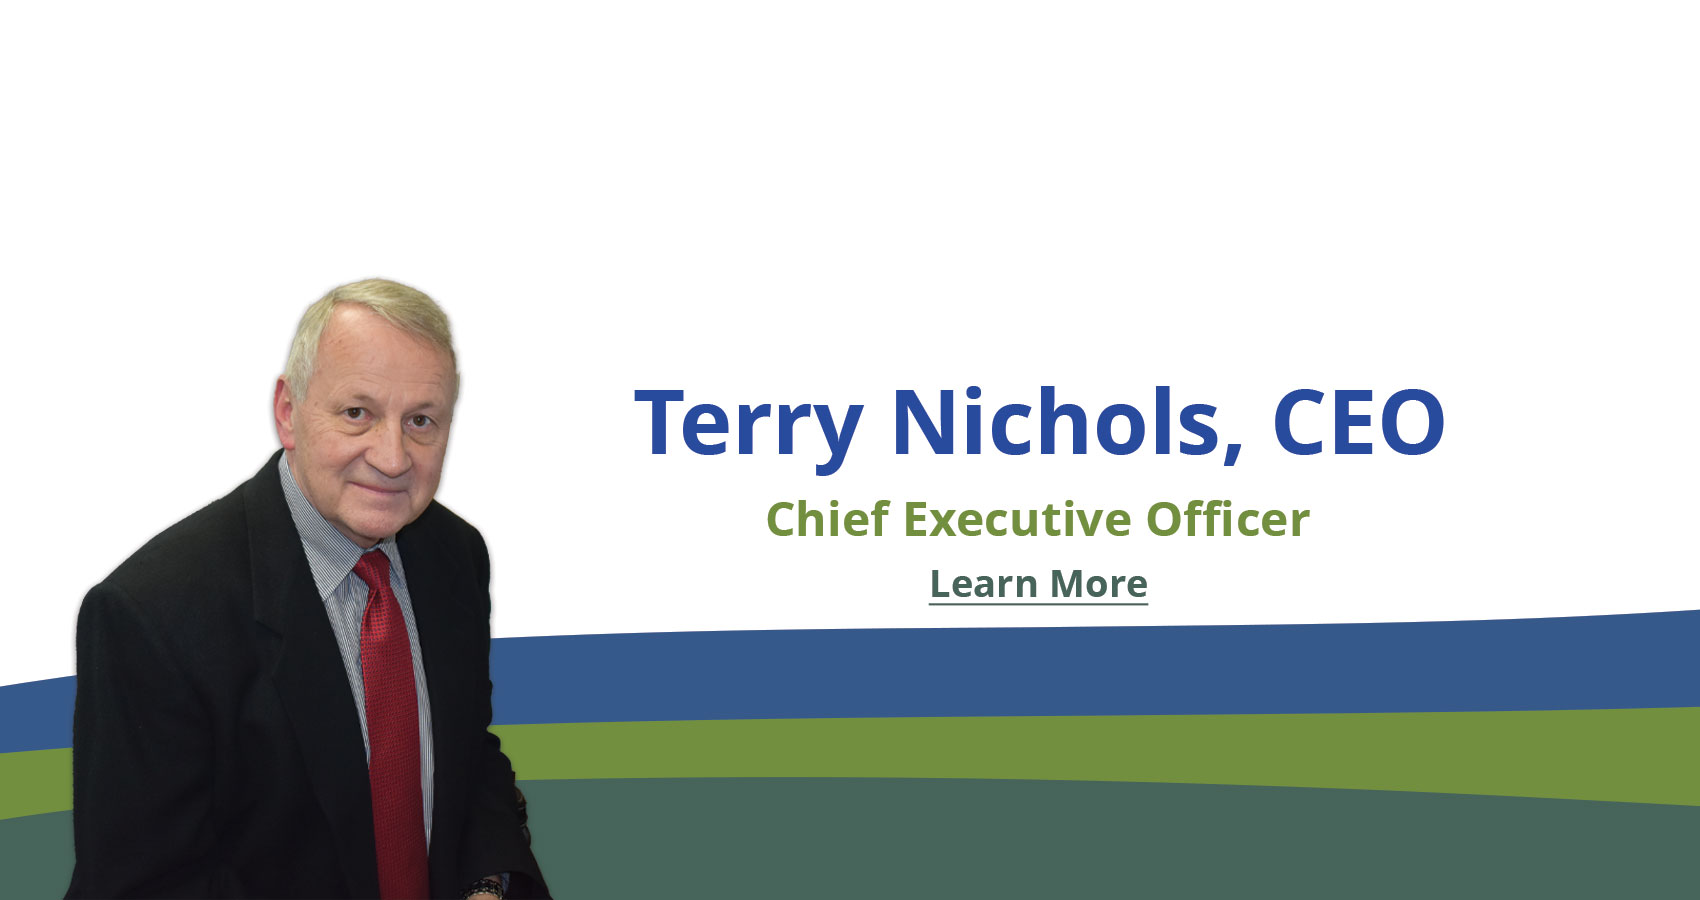 Terry Nichols, CEO 
Chief Executive Officer
Learn more